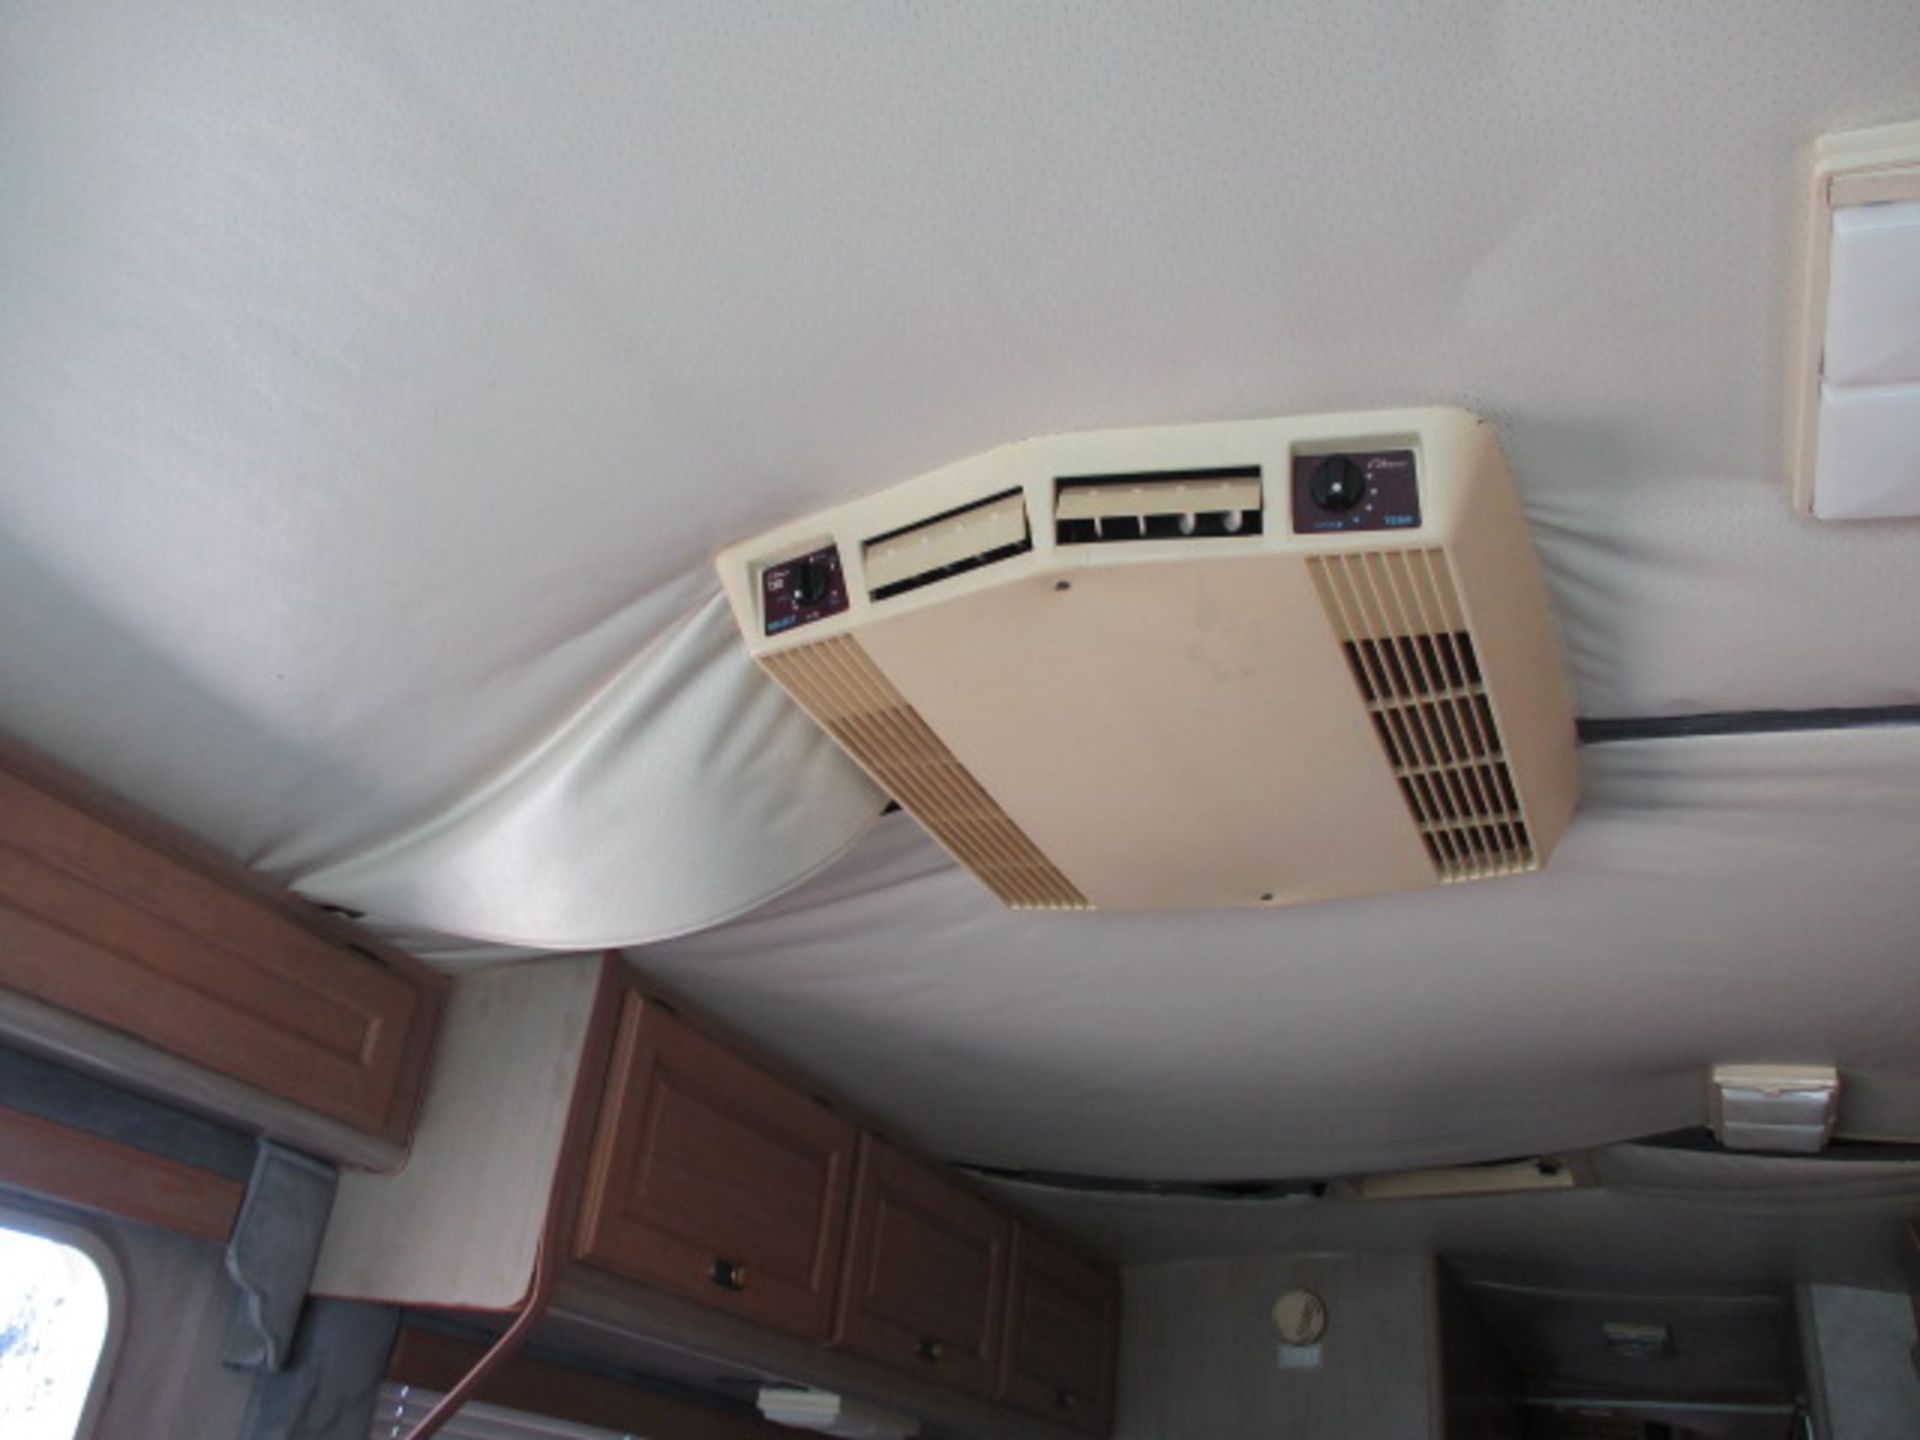 Fleetwood Southwind Motor Home, V8 Gas, Automatic, Refrigerator, Microwave, Stove, Bathroom W/ - Image 54 of 121